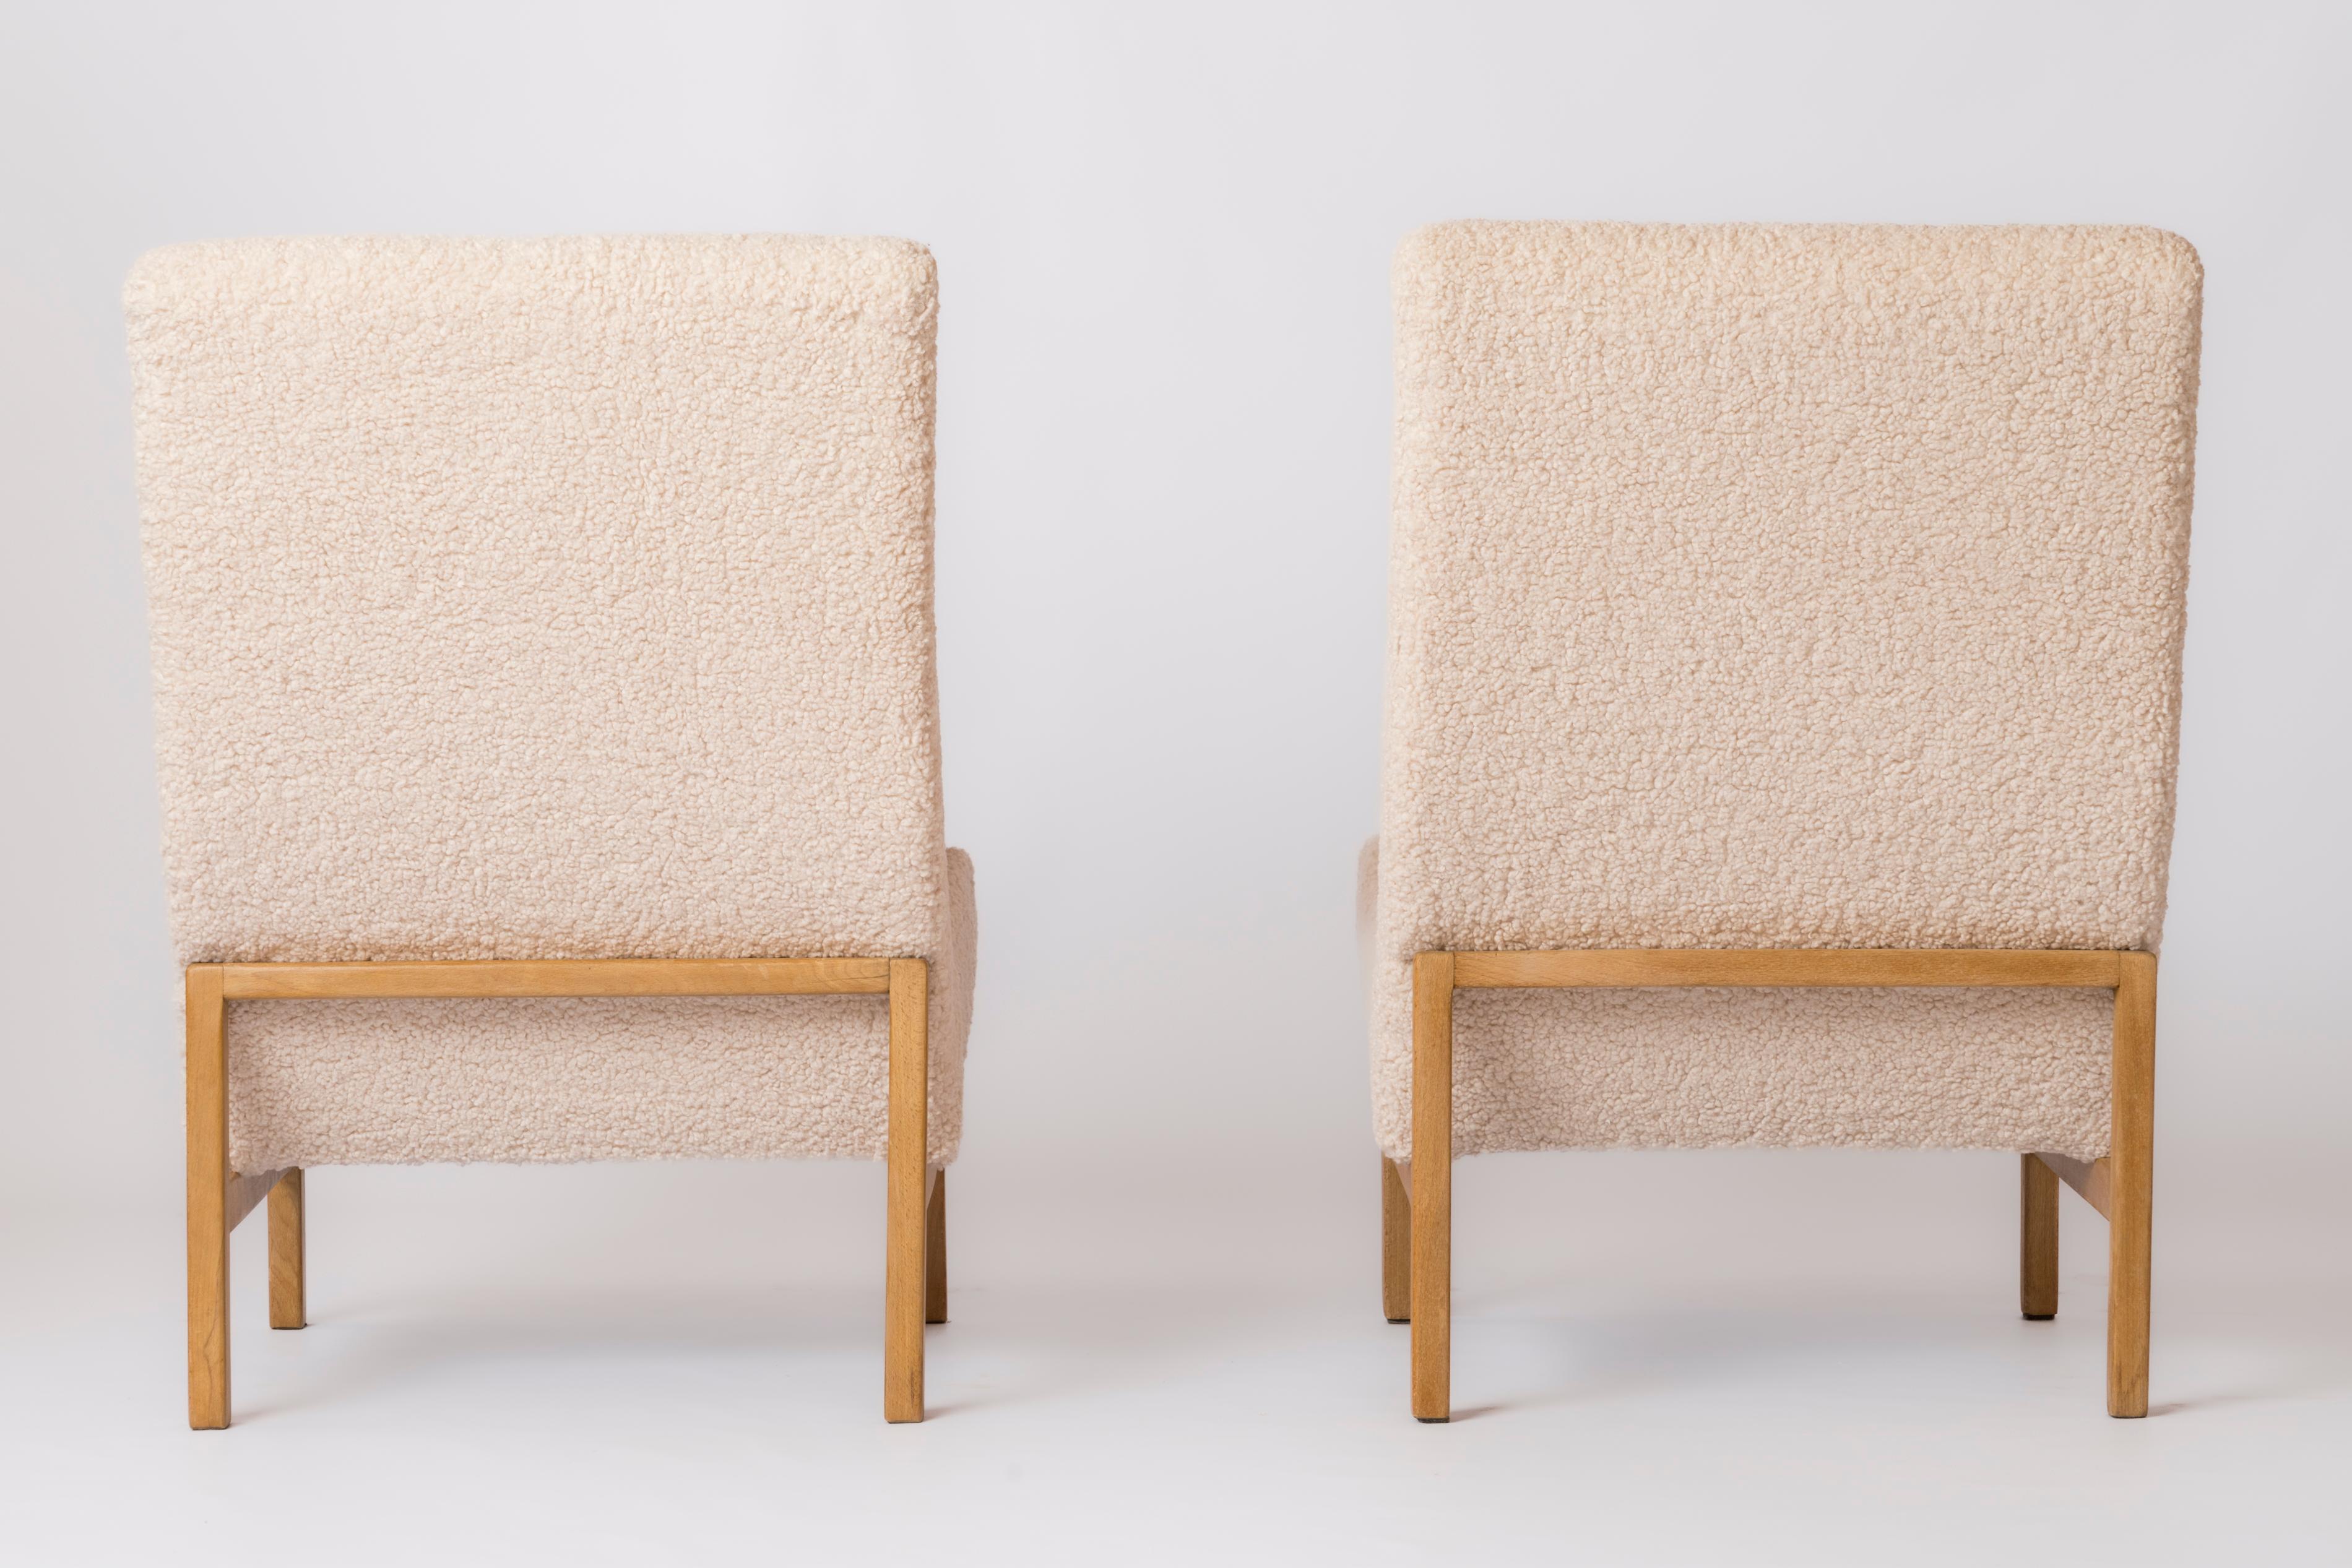 Mid-20th Century Ash & Cream Boucle Chairs by Guariche, Mortier, Motte for ARP, France, 1955 For Sale